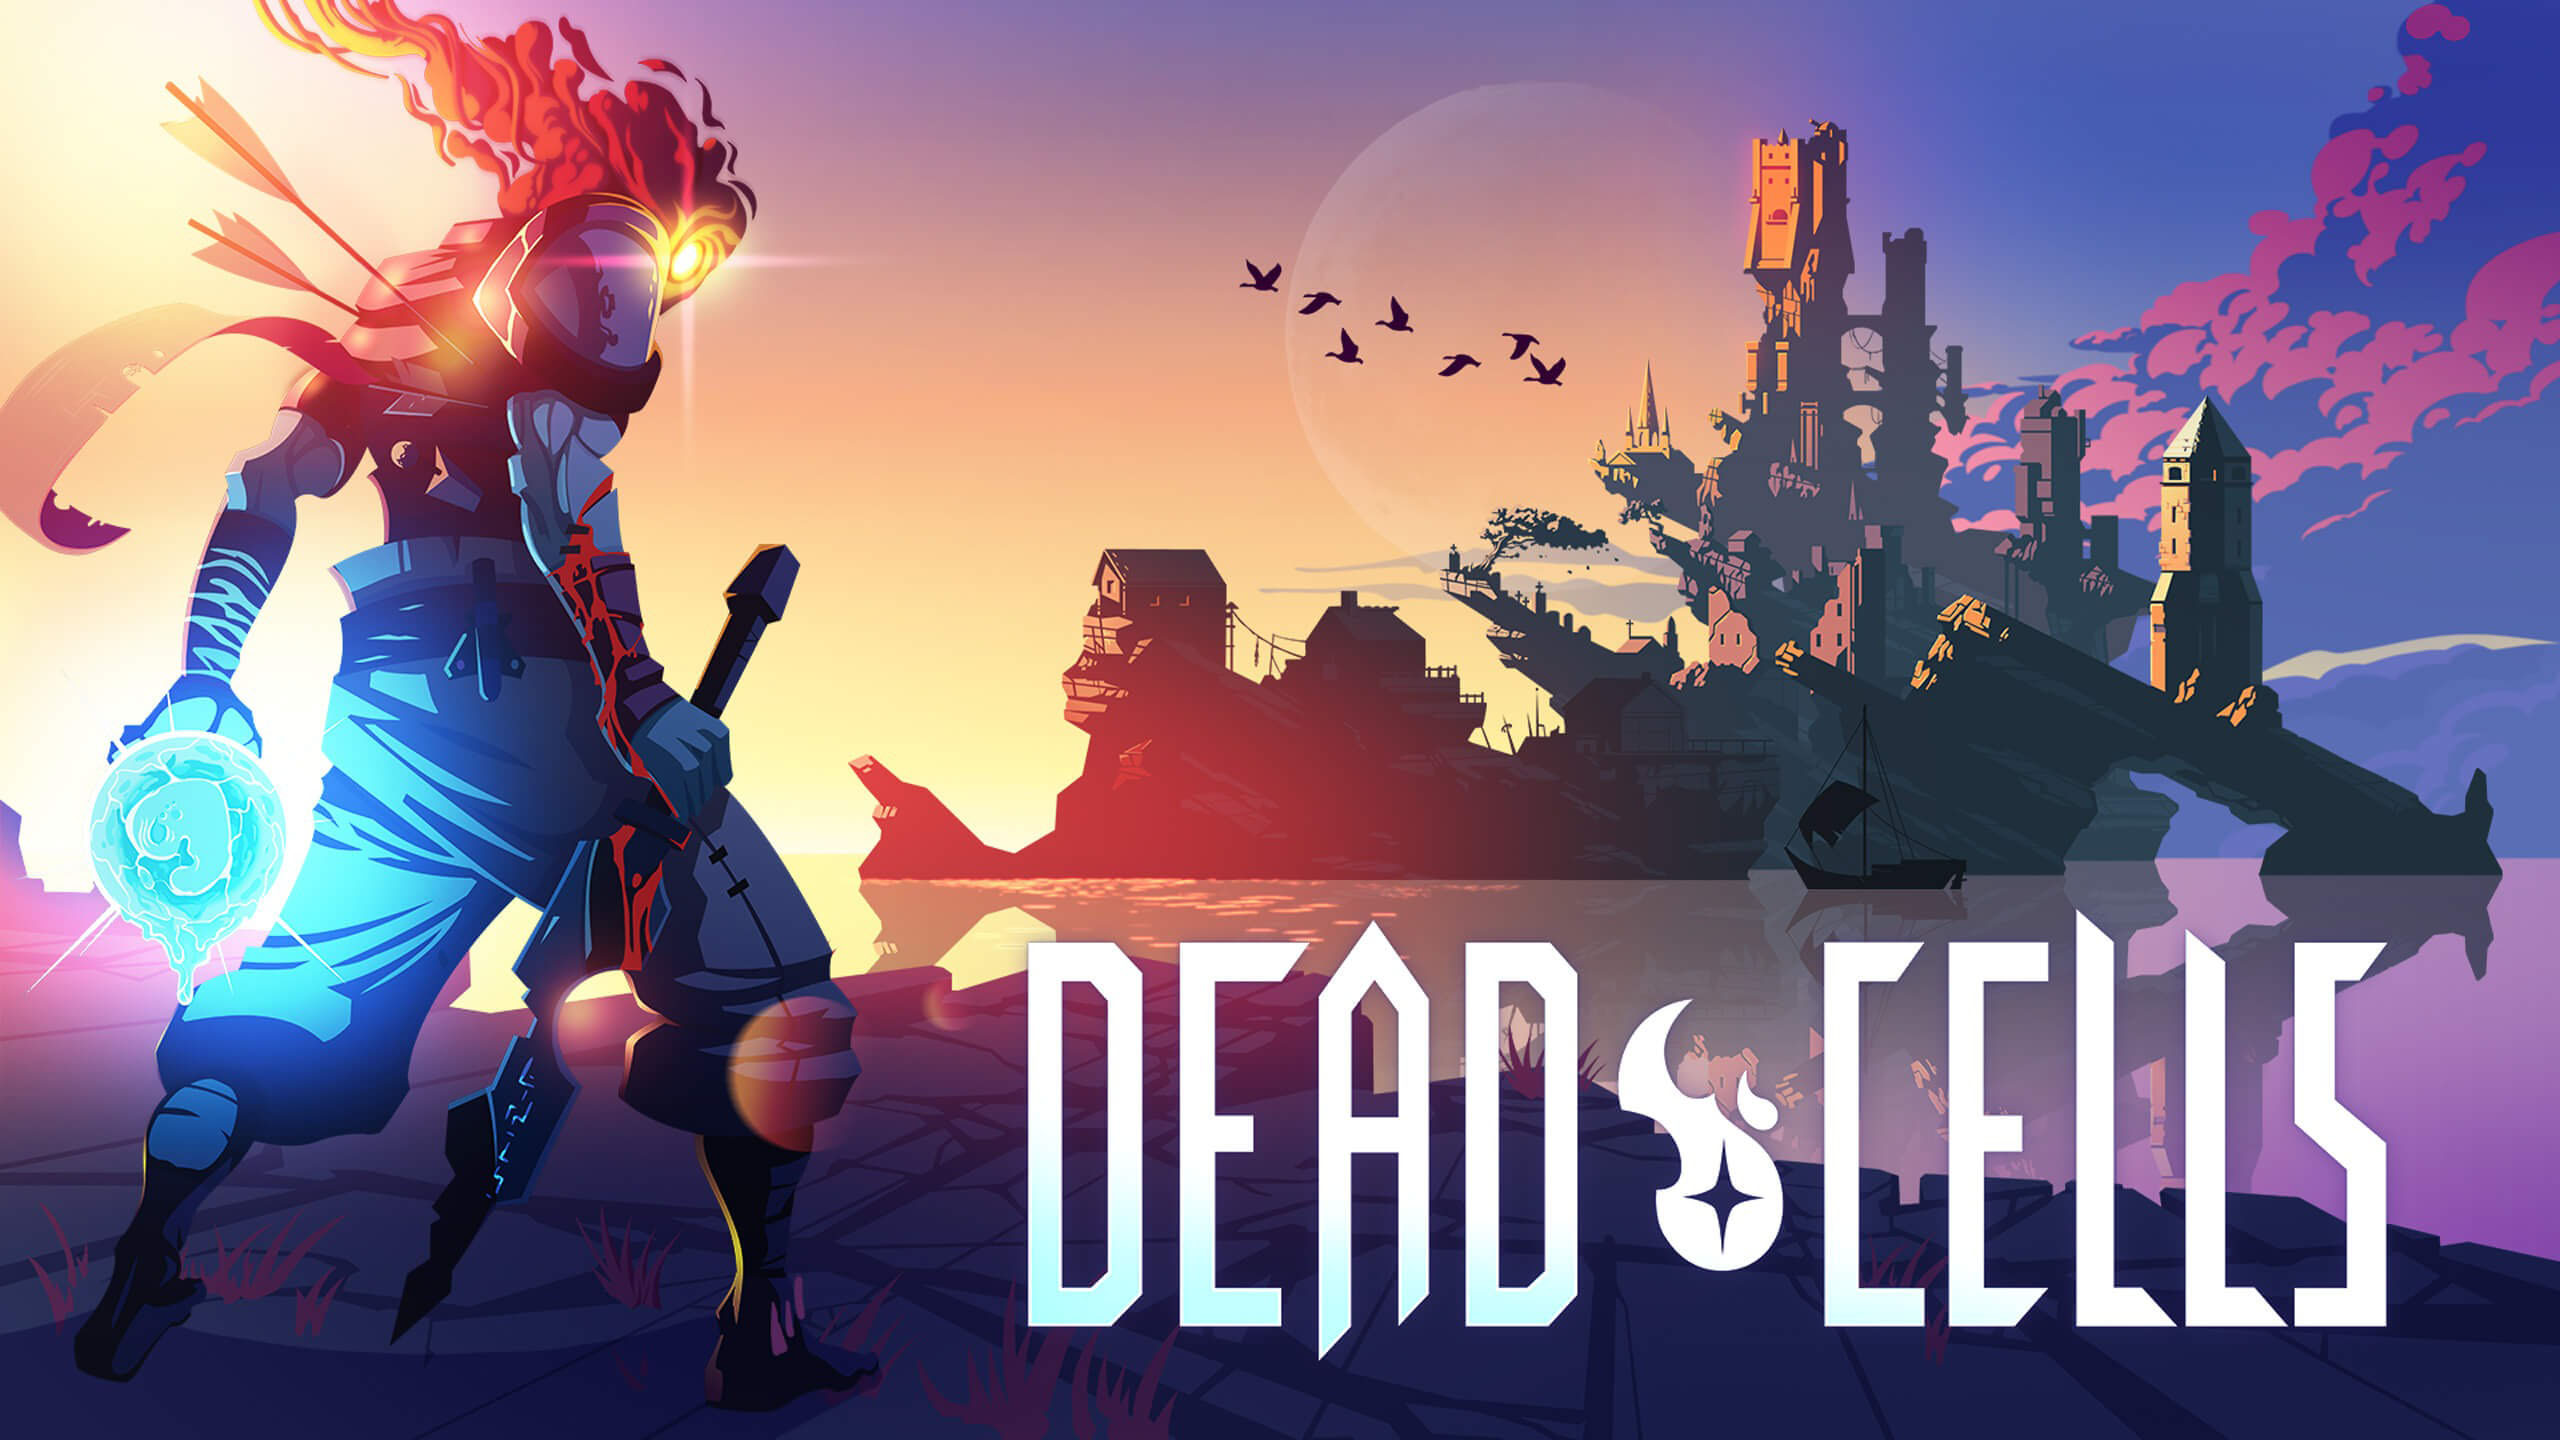 Dead Cells is a roguelike video game inspired by Metroidvania-style games, developed and published by Motion Twin. After a ye...